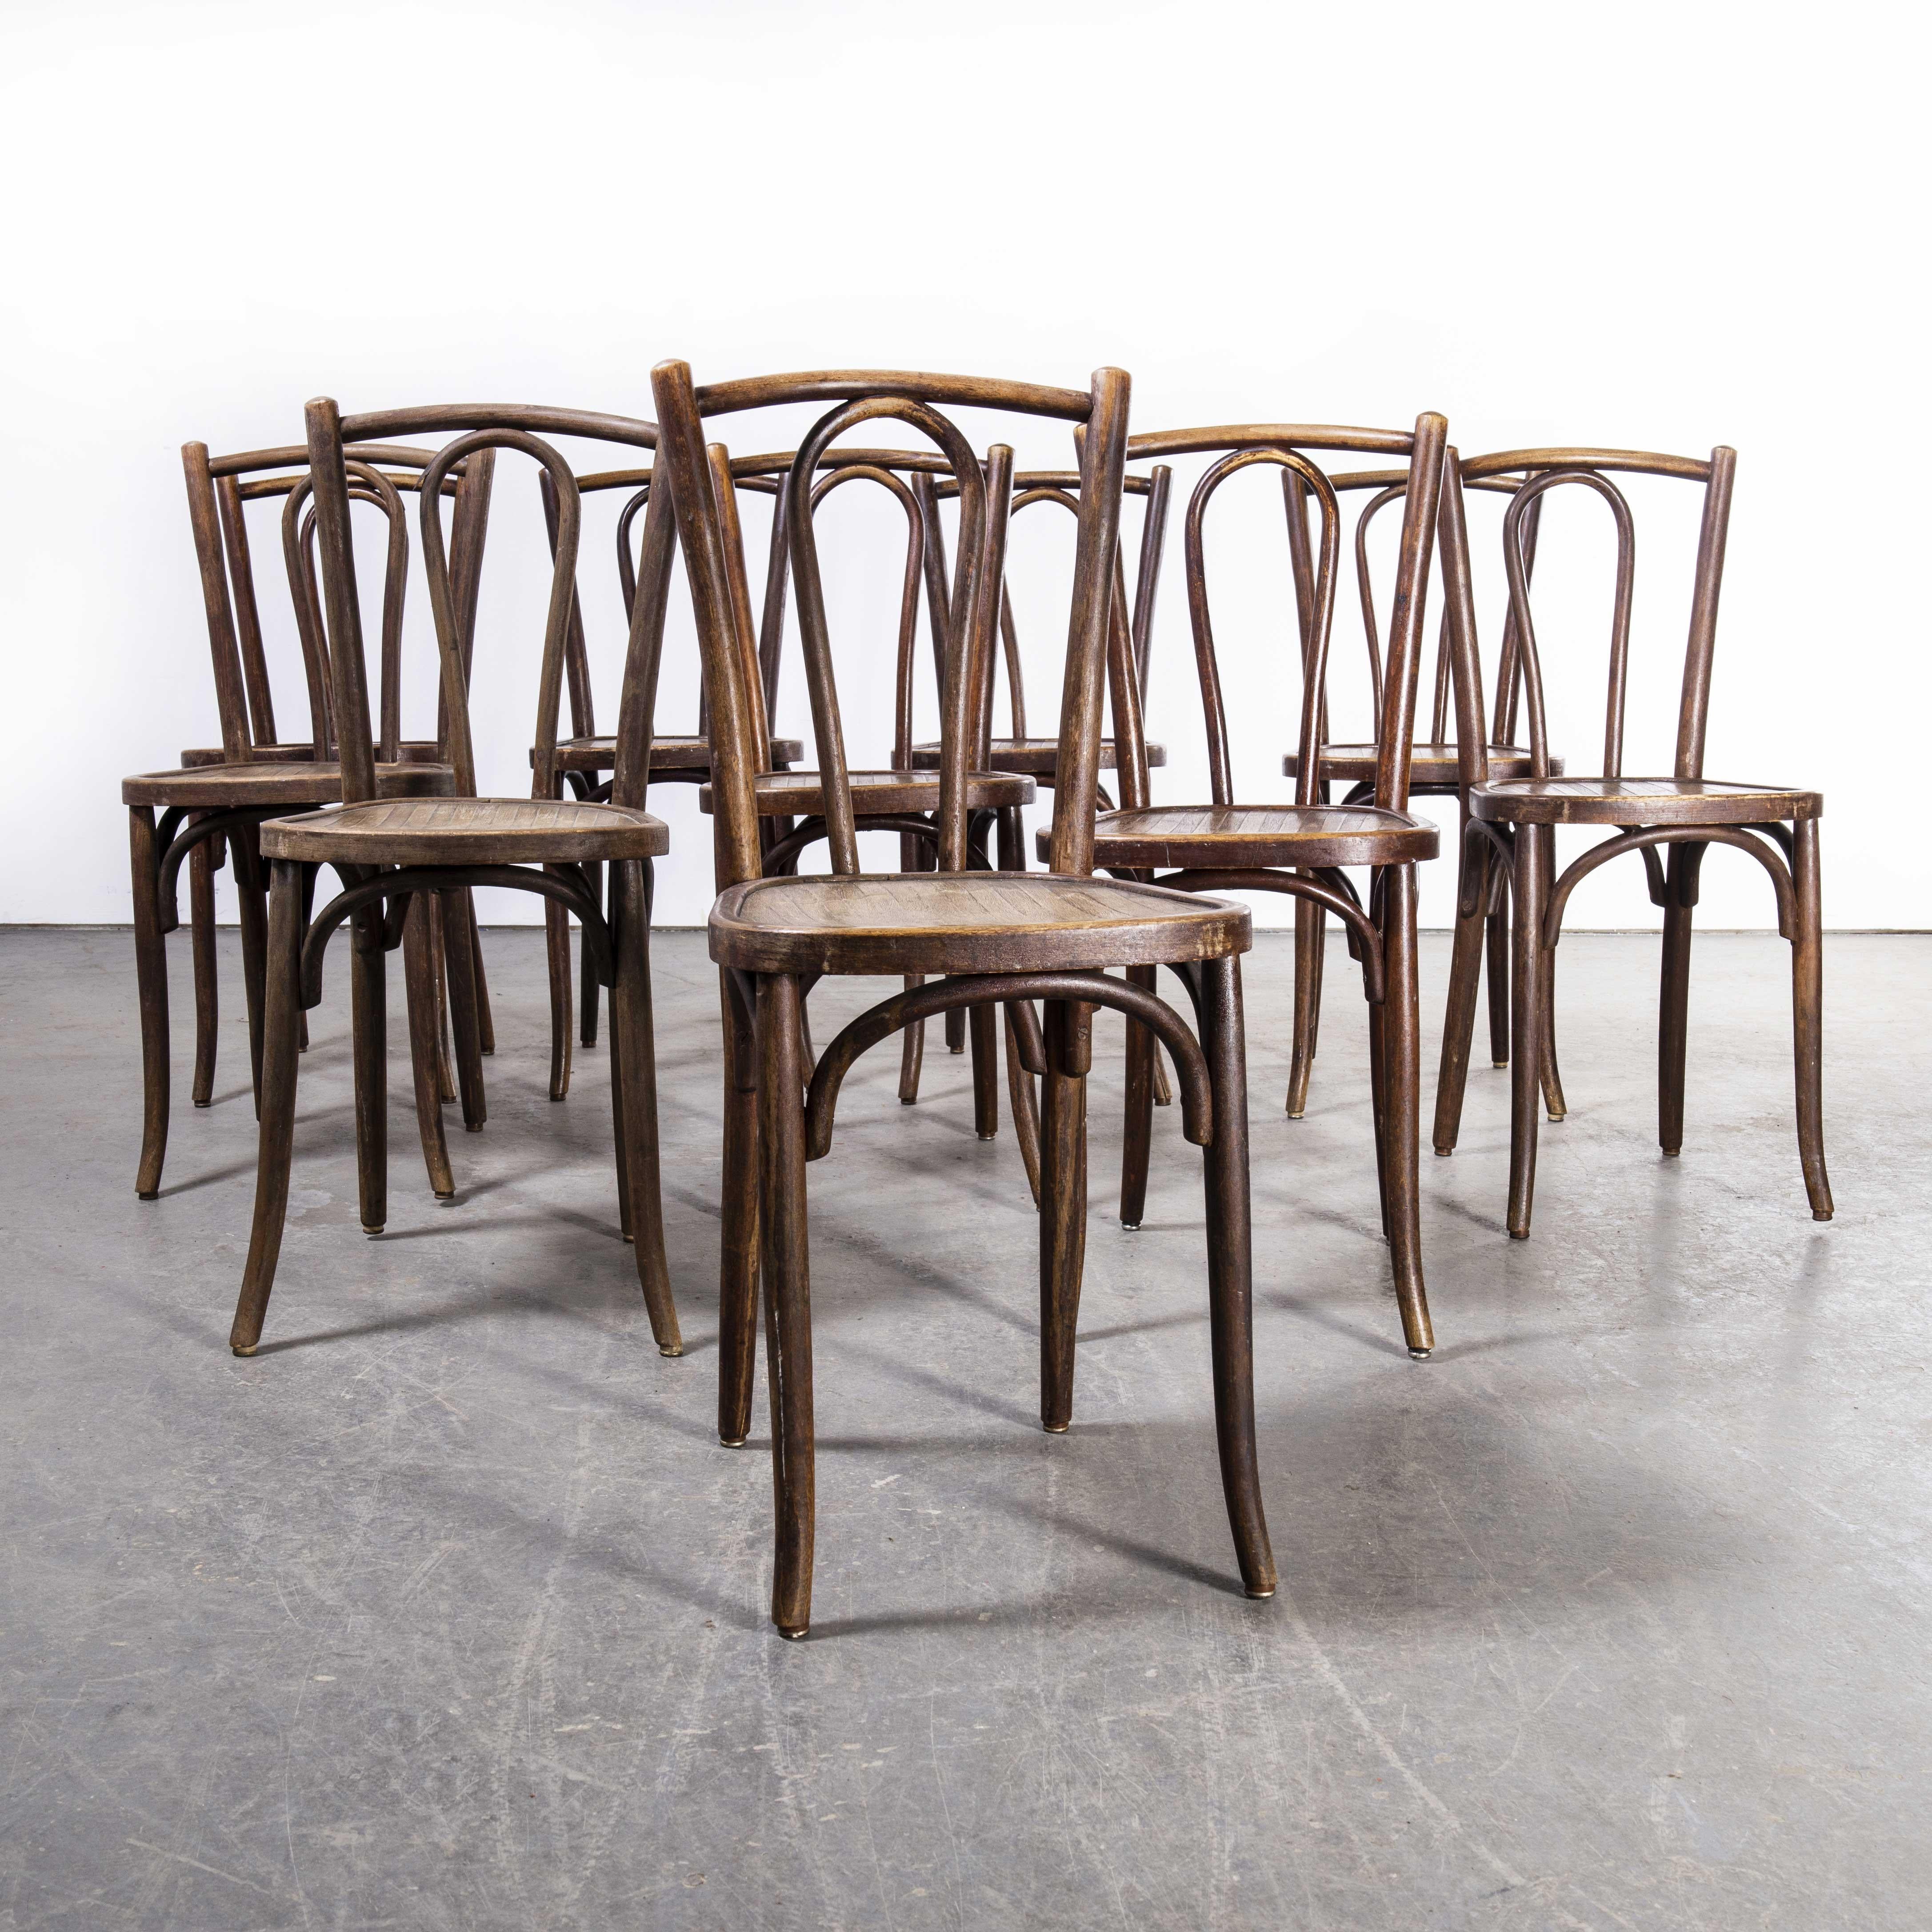 1930’s Fischel French Bentwood dining chairs – Set of ten
1930’s Fischel French Bentwood dining chairs – Set of ten. The process of steam bending beech to create elegant chairs was discovered and developed by Thonet, but when its patents expired in